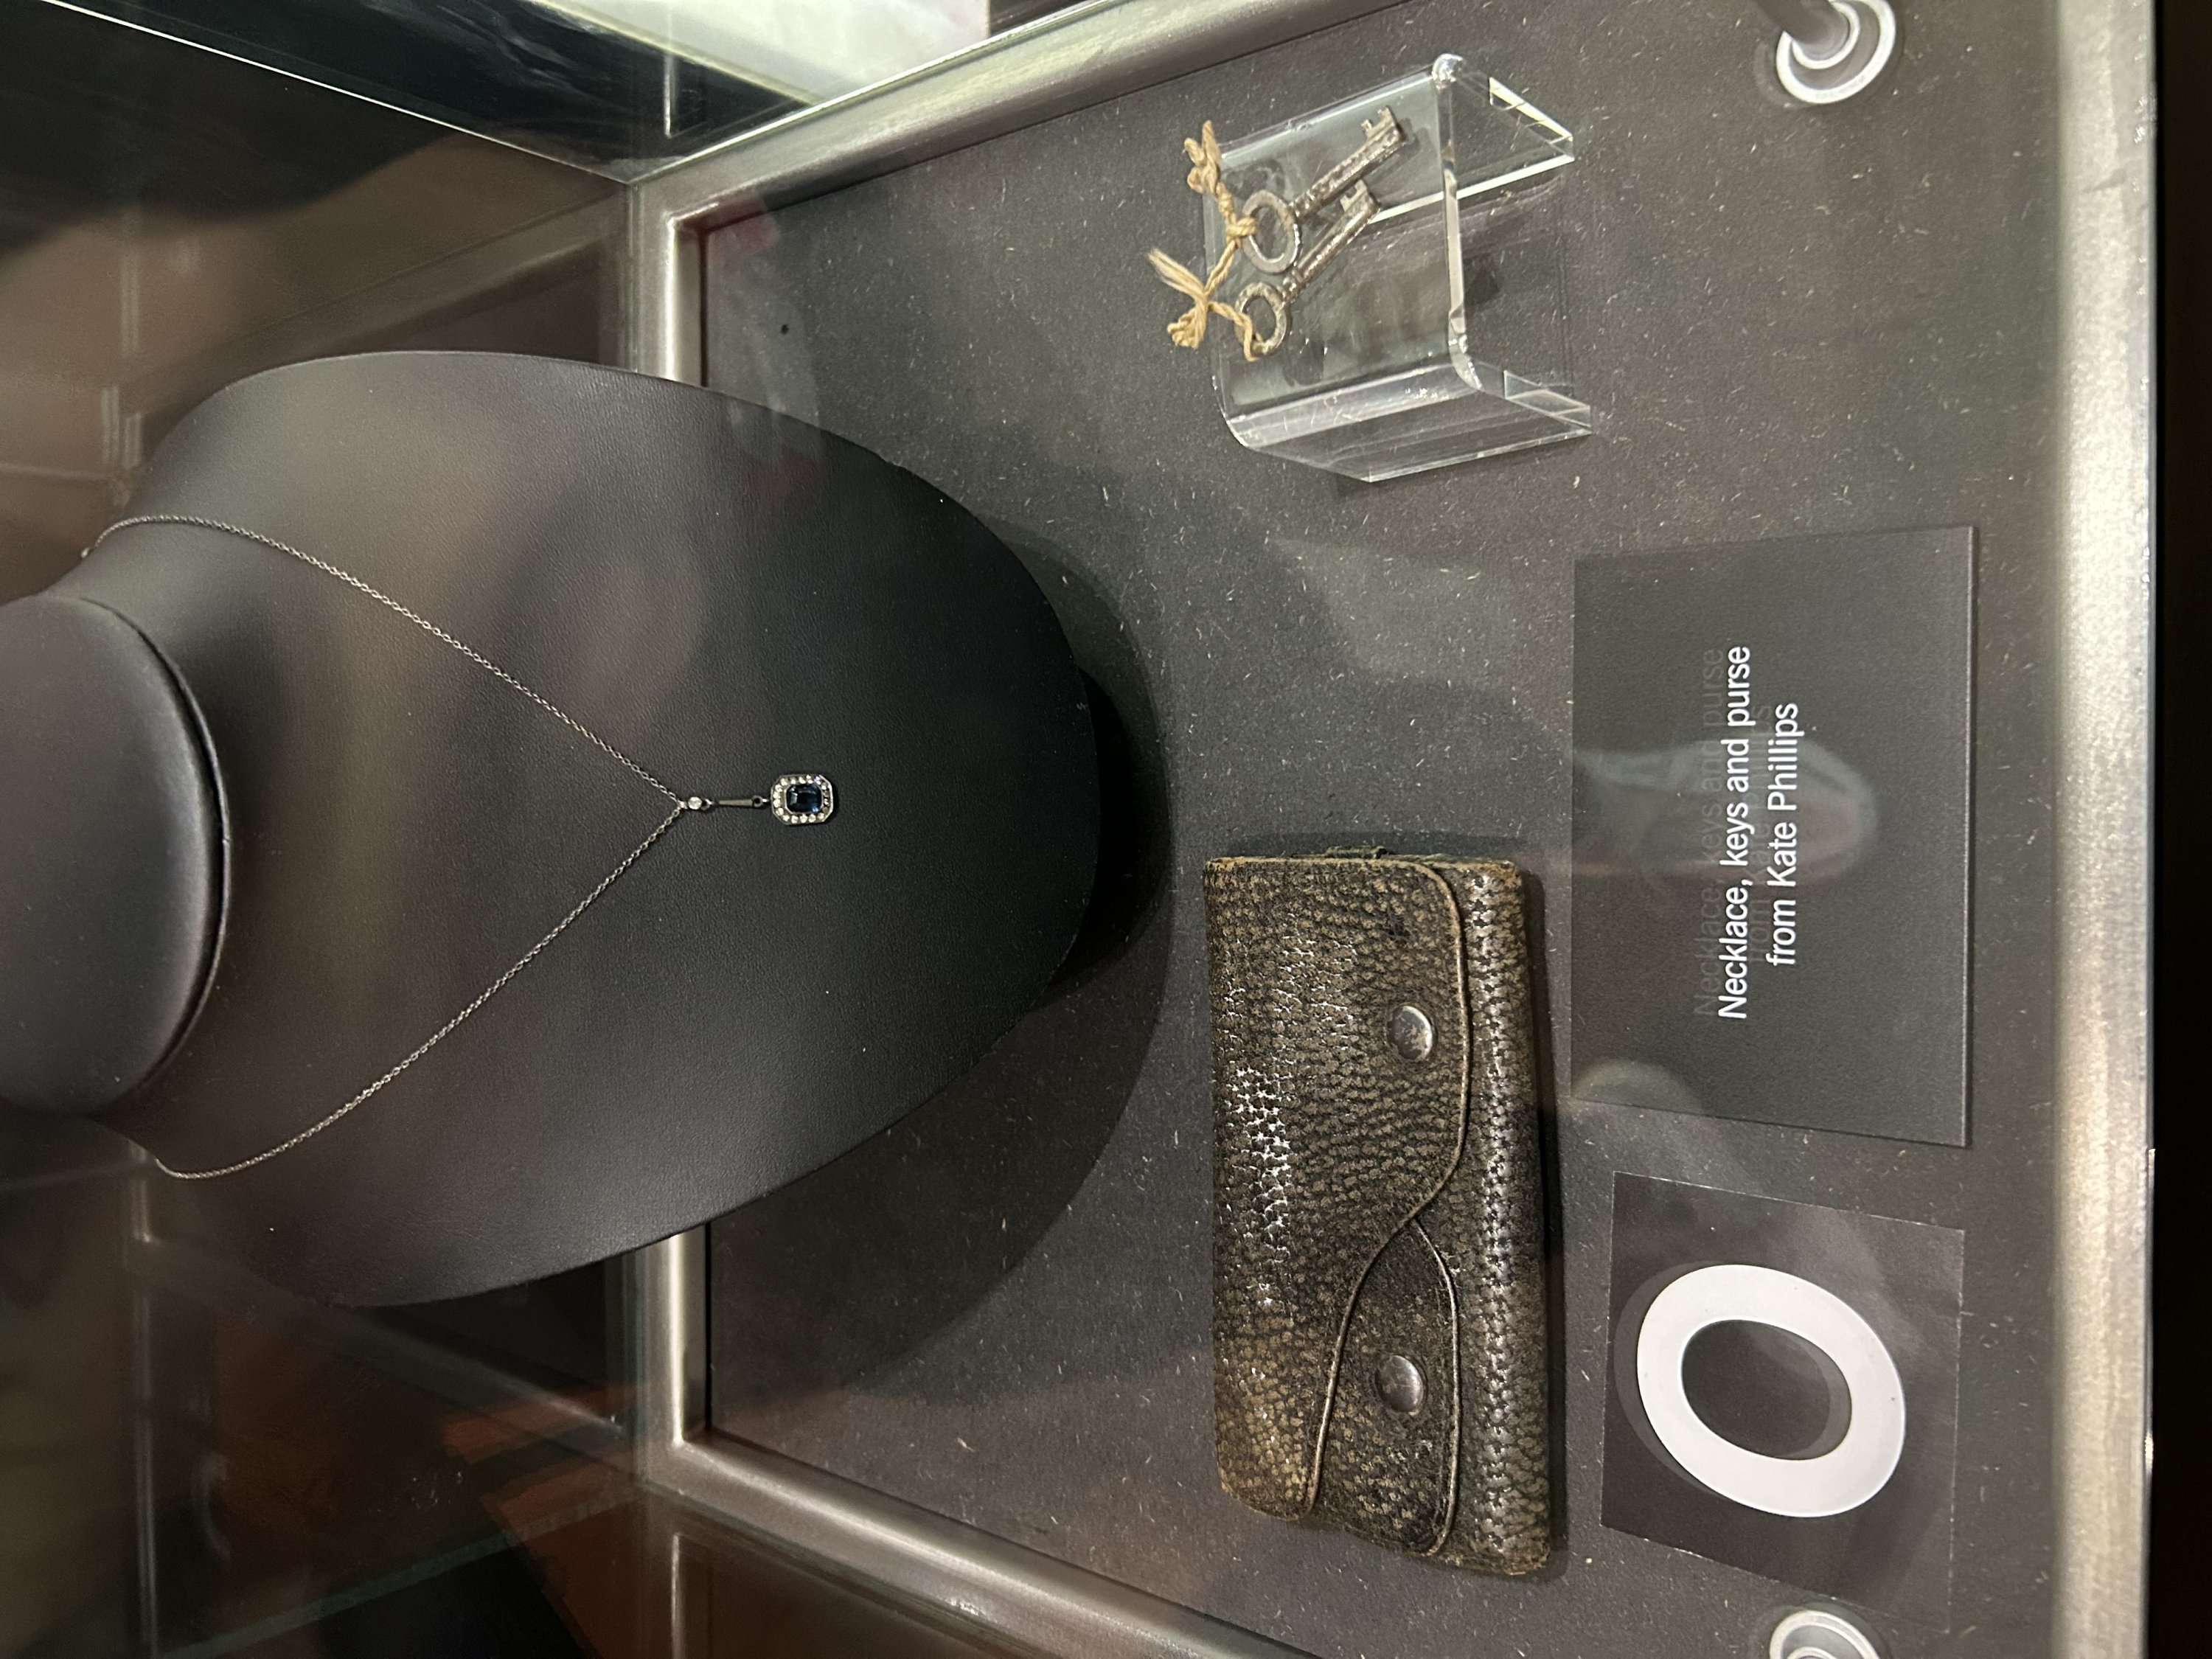 The heart of the ocean necklace is  displayed at the 'Titanic: The Exhibition.' (Photo by Funda Karayel)